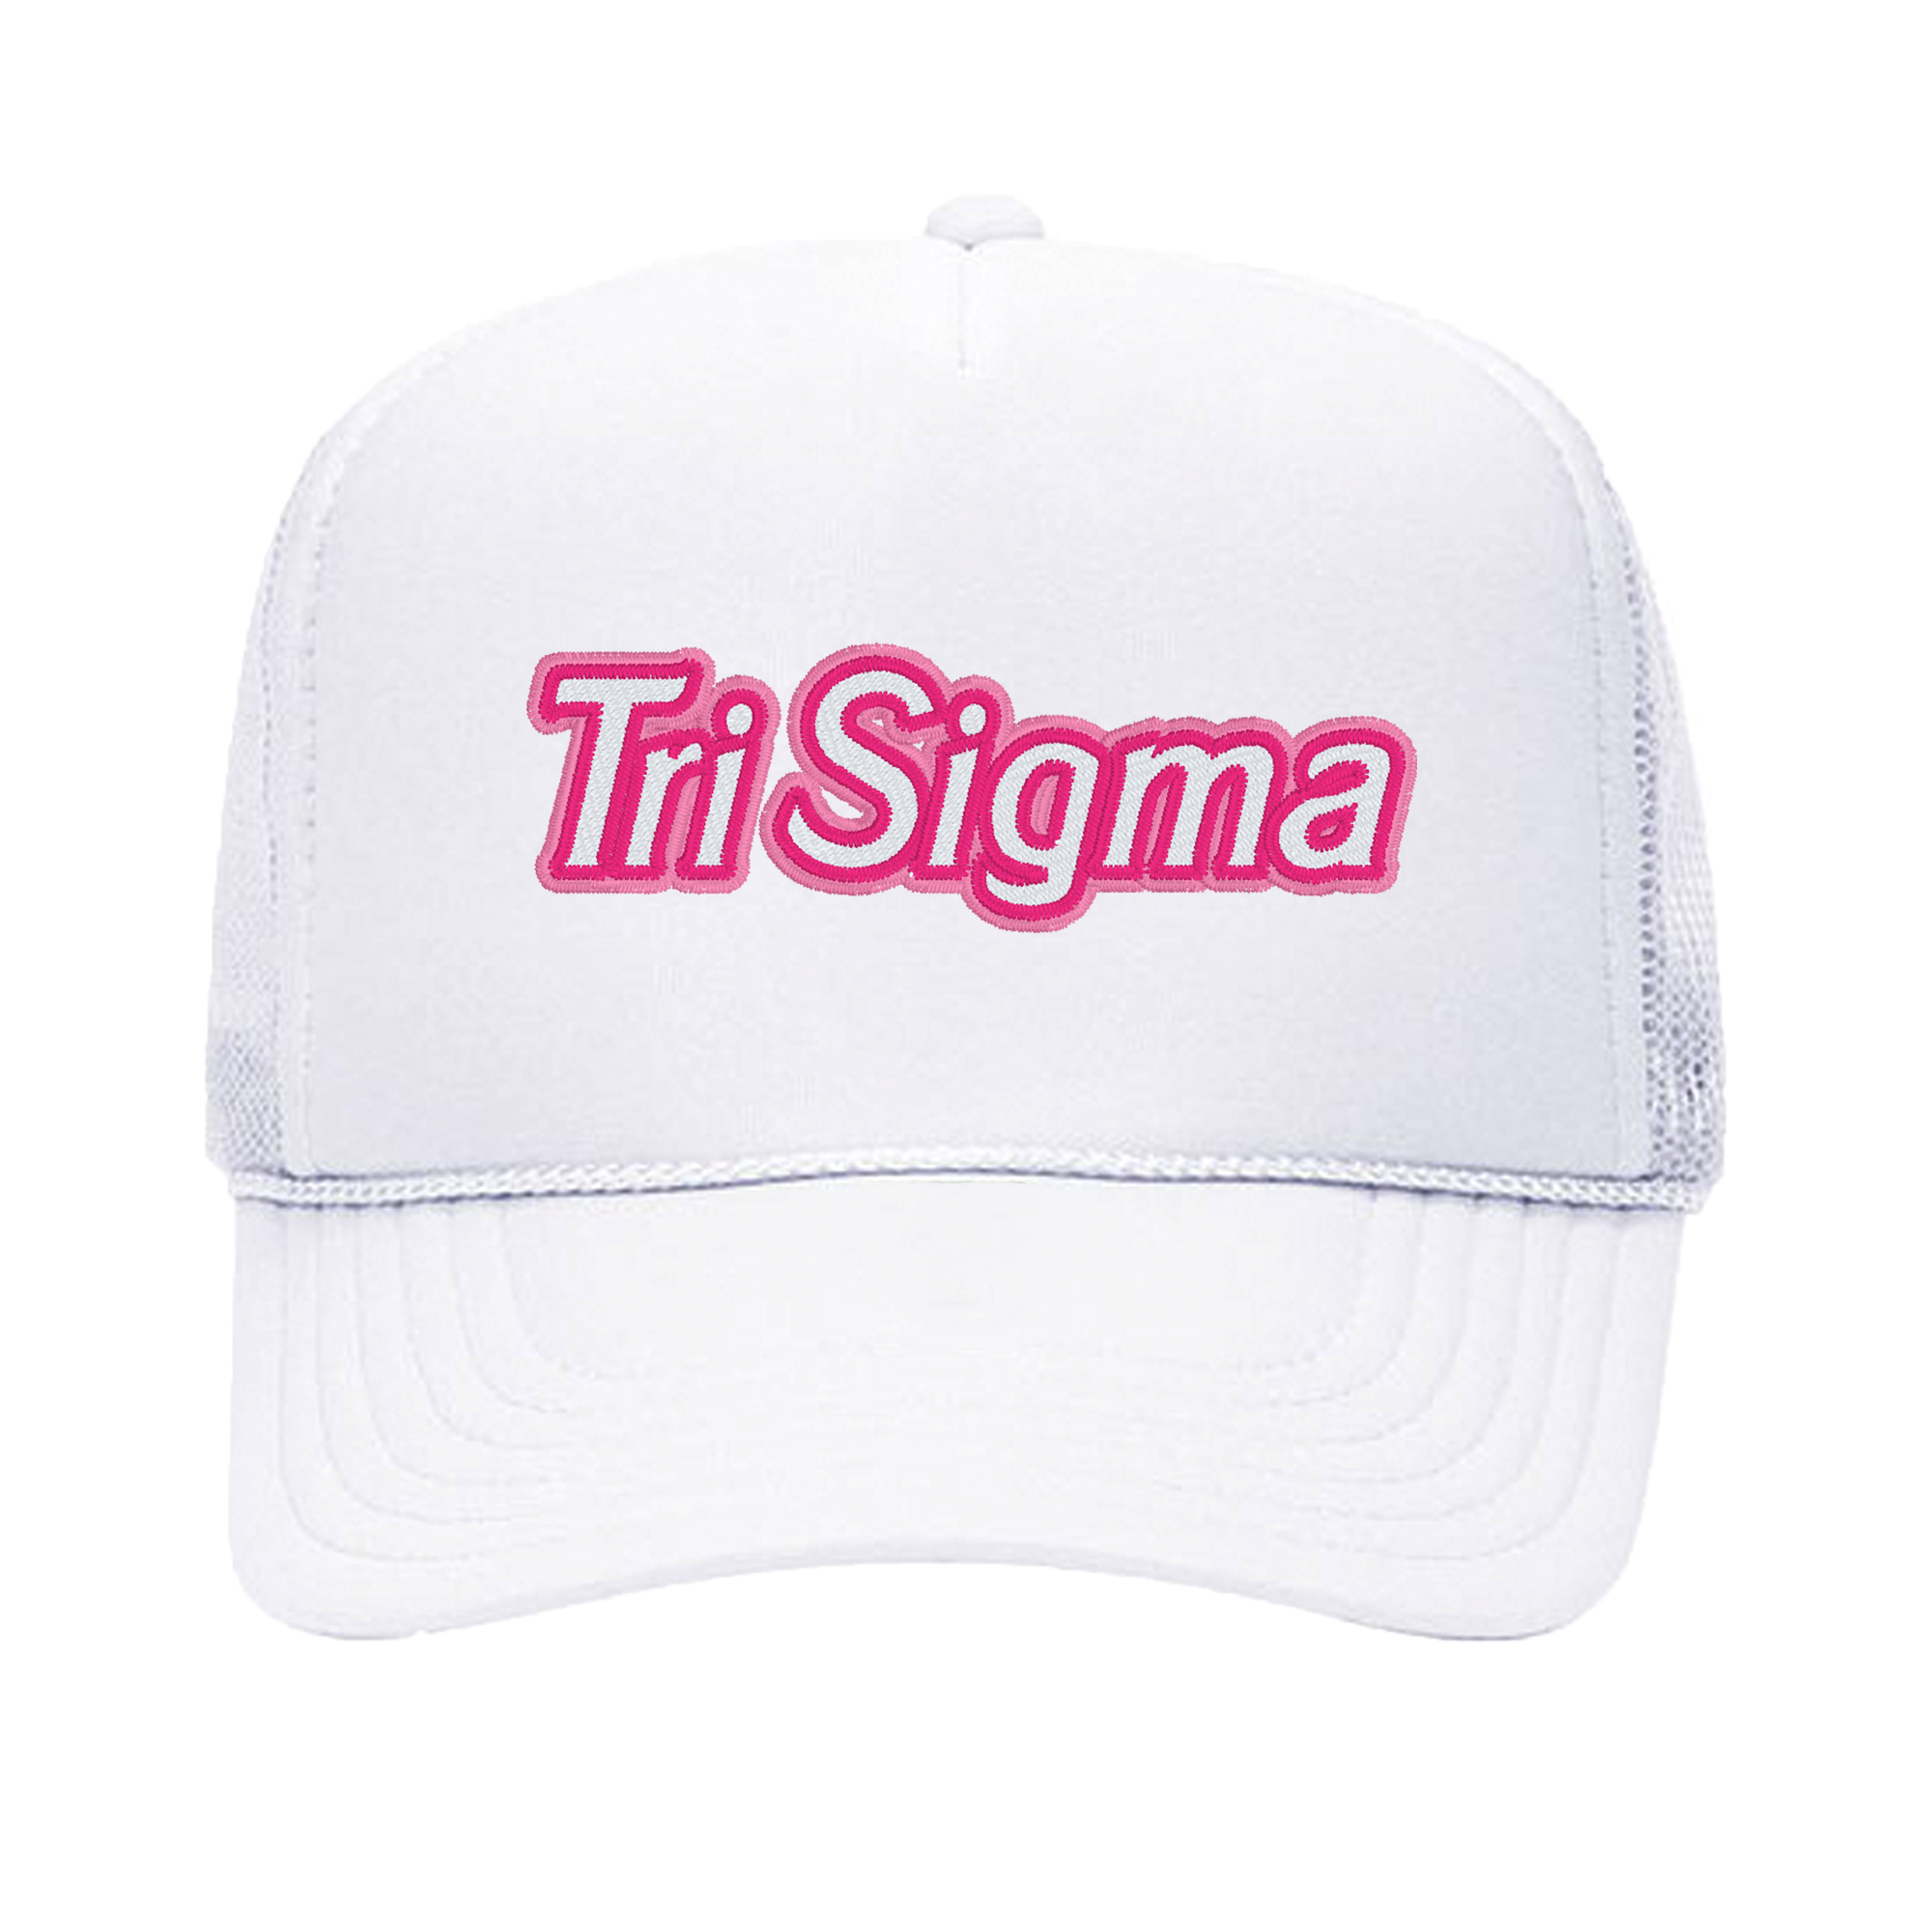 a white trucker hat with the word tri stigma on it